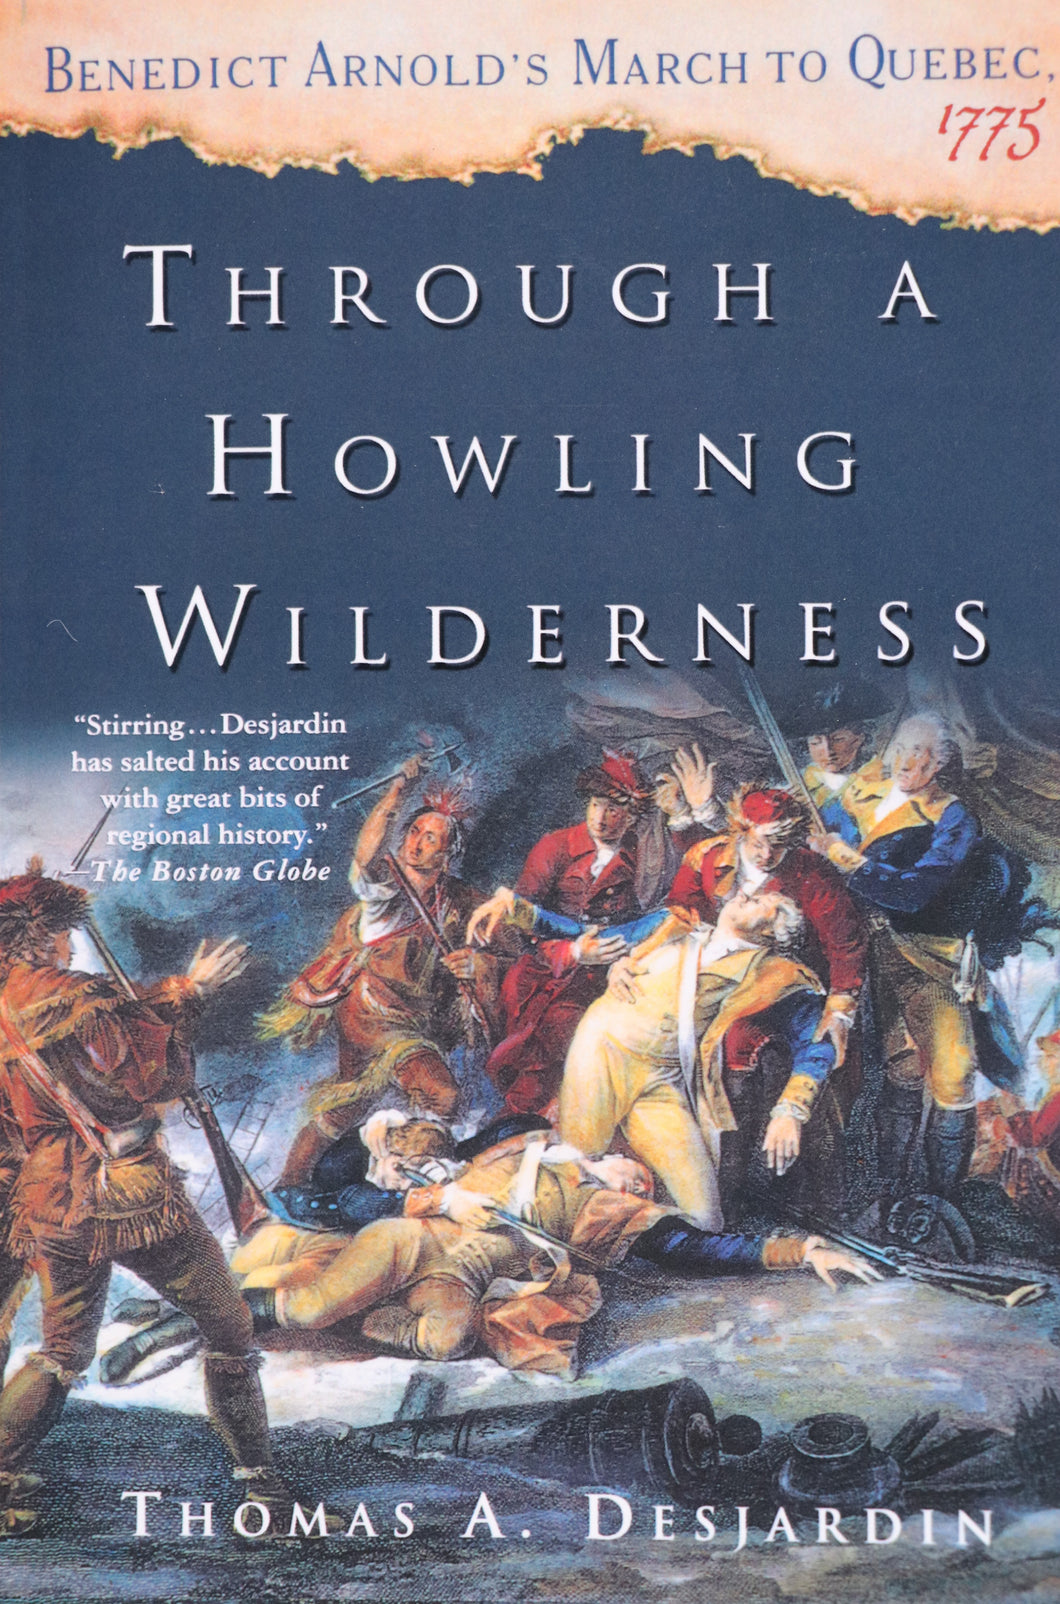 Through A Howling Wilderness: Benedict Arnold's March to Quebec, 1775